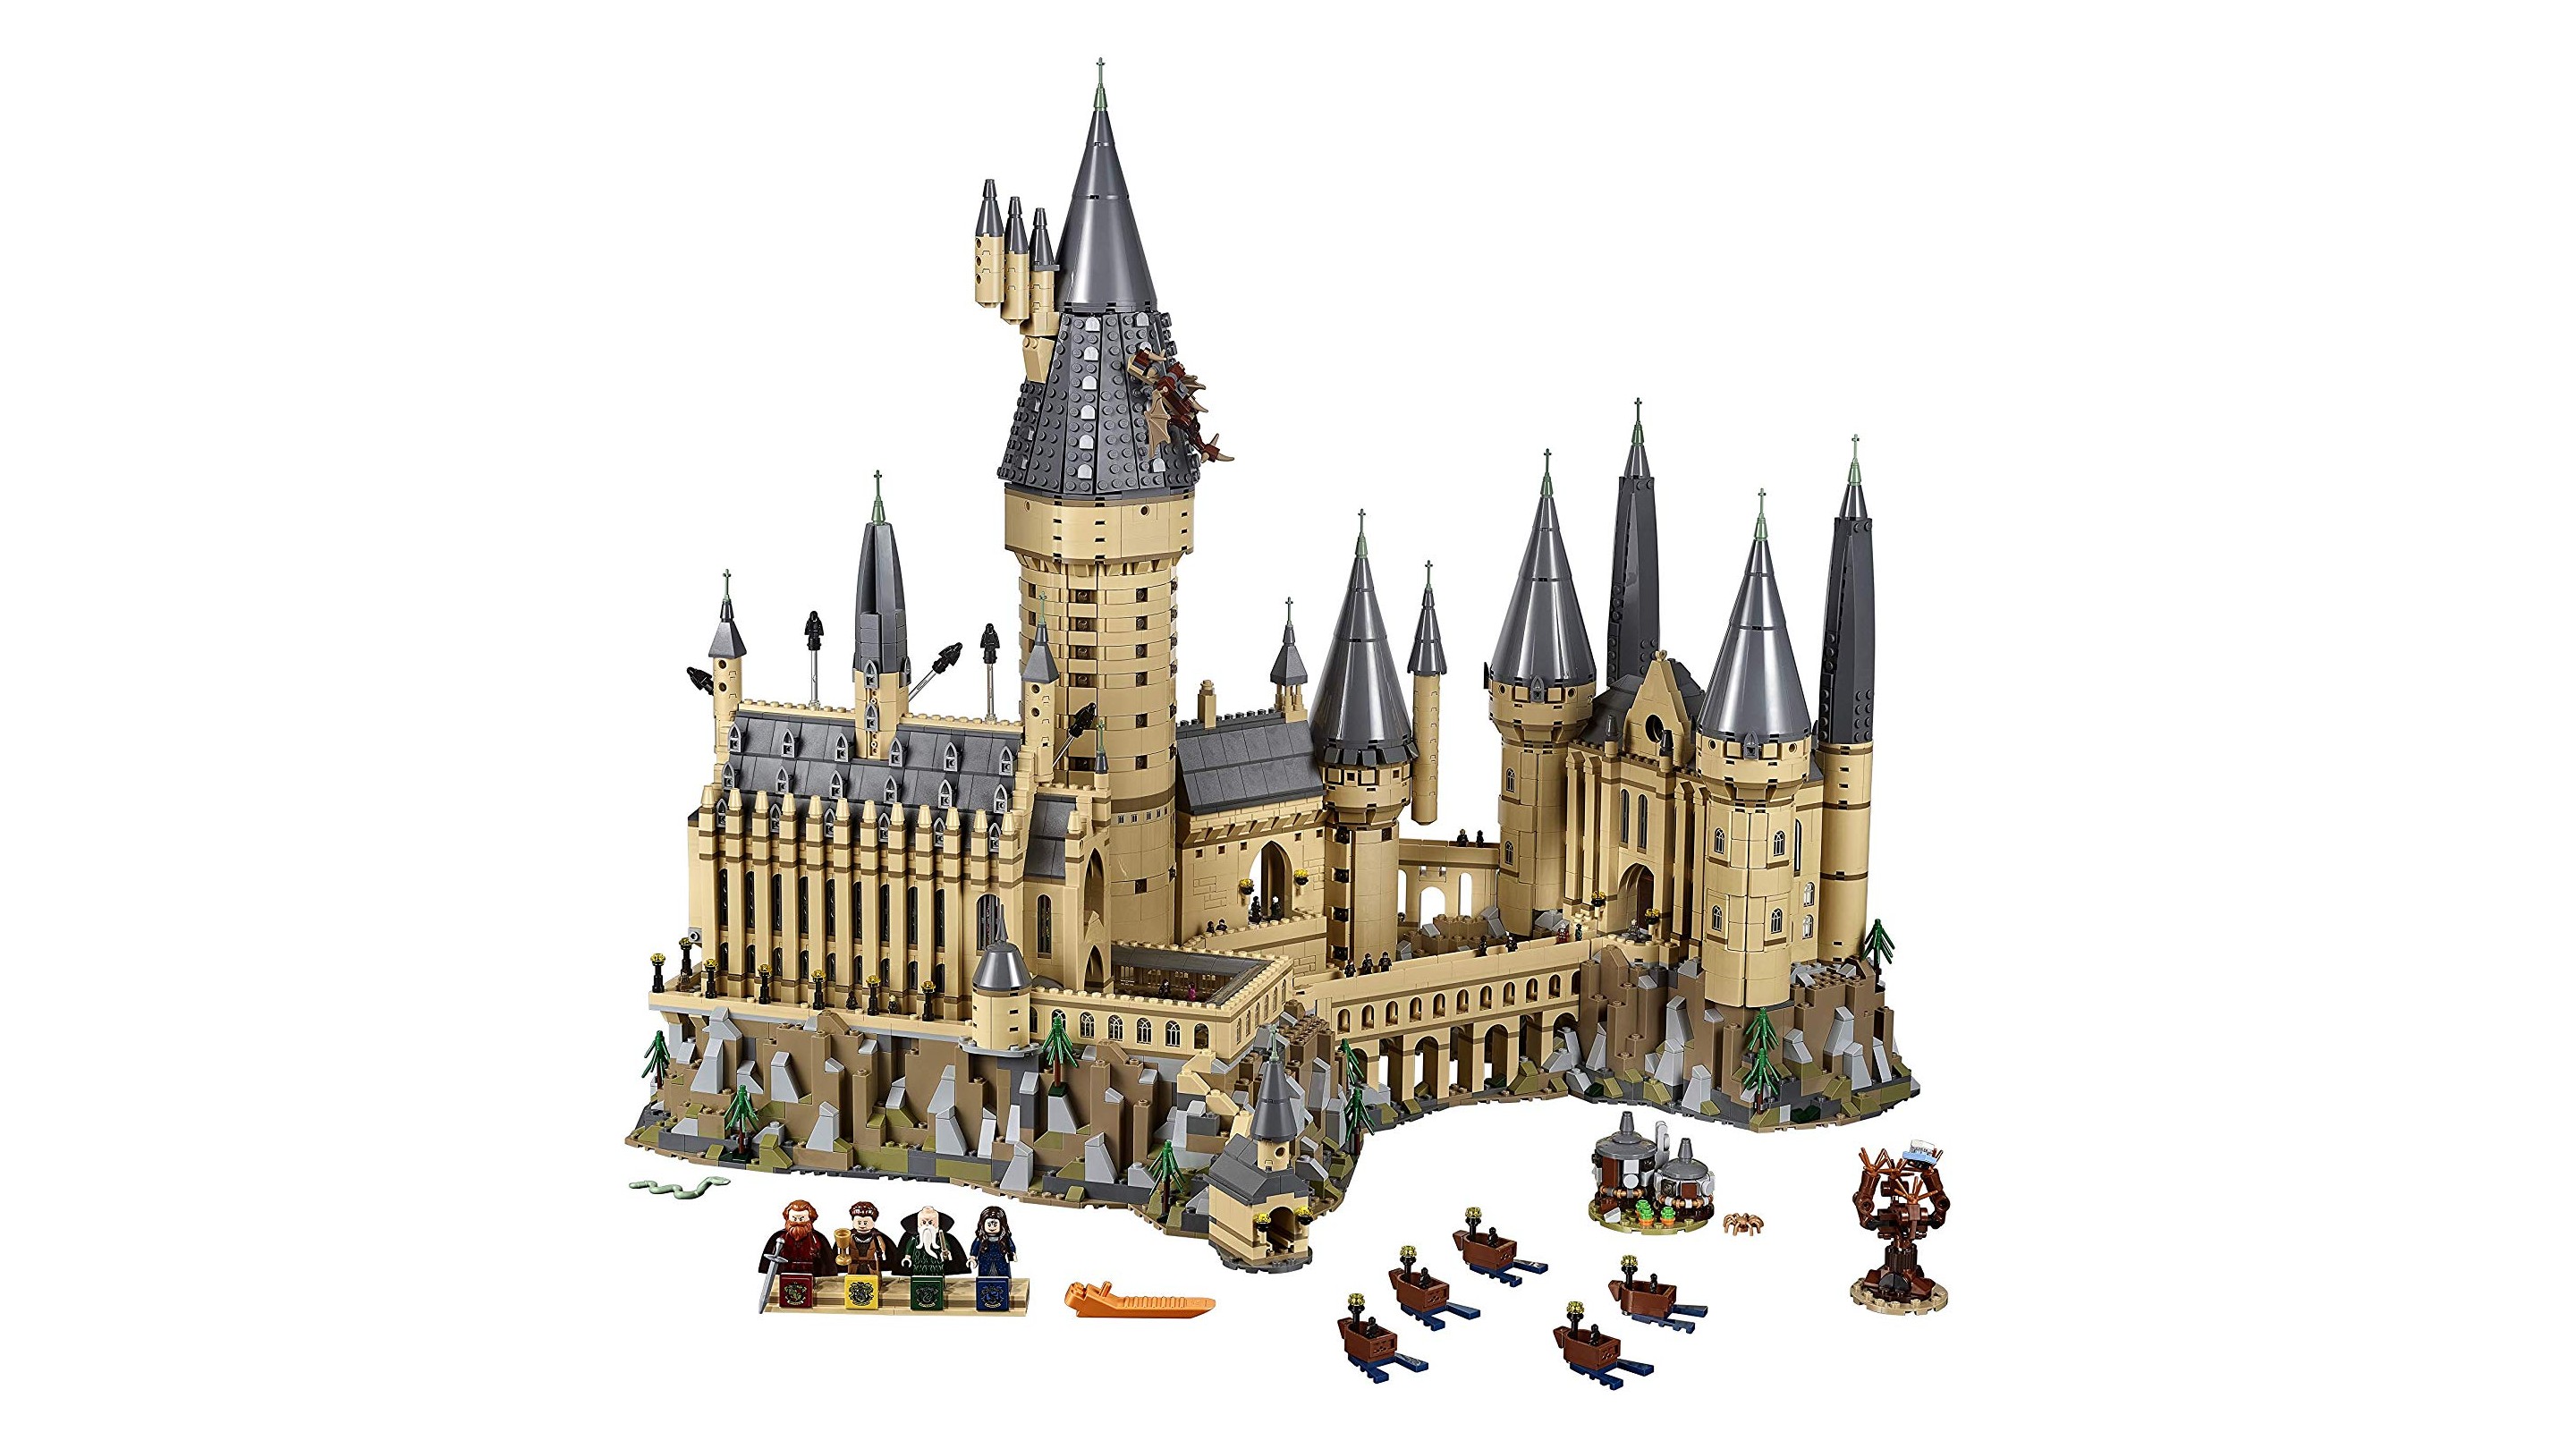 Lego Harry Potter: Castle and minifigures